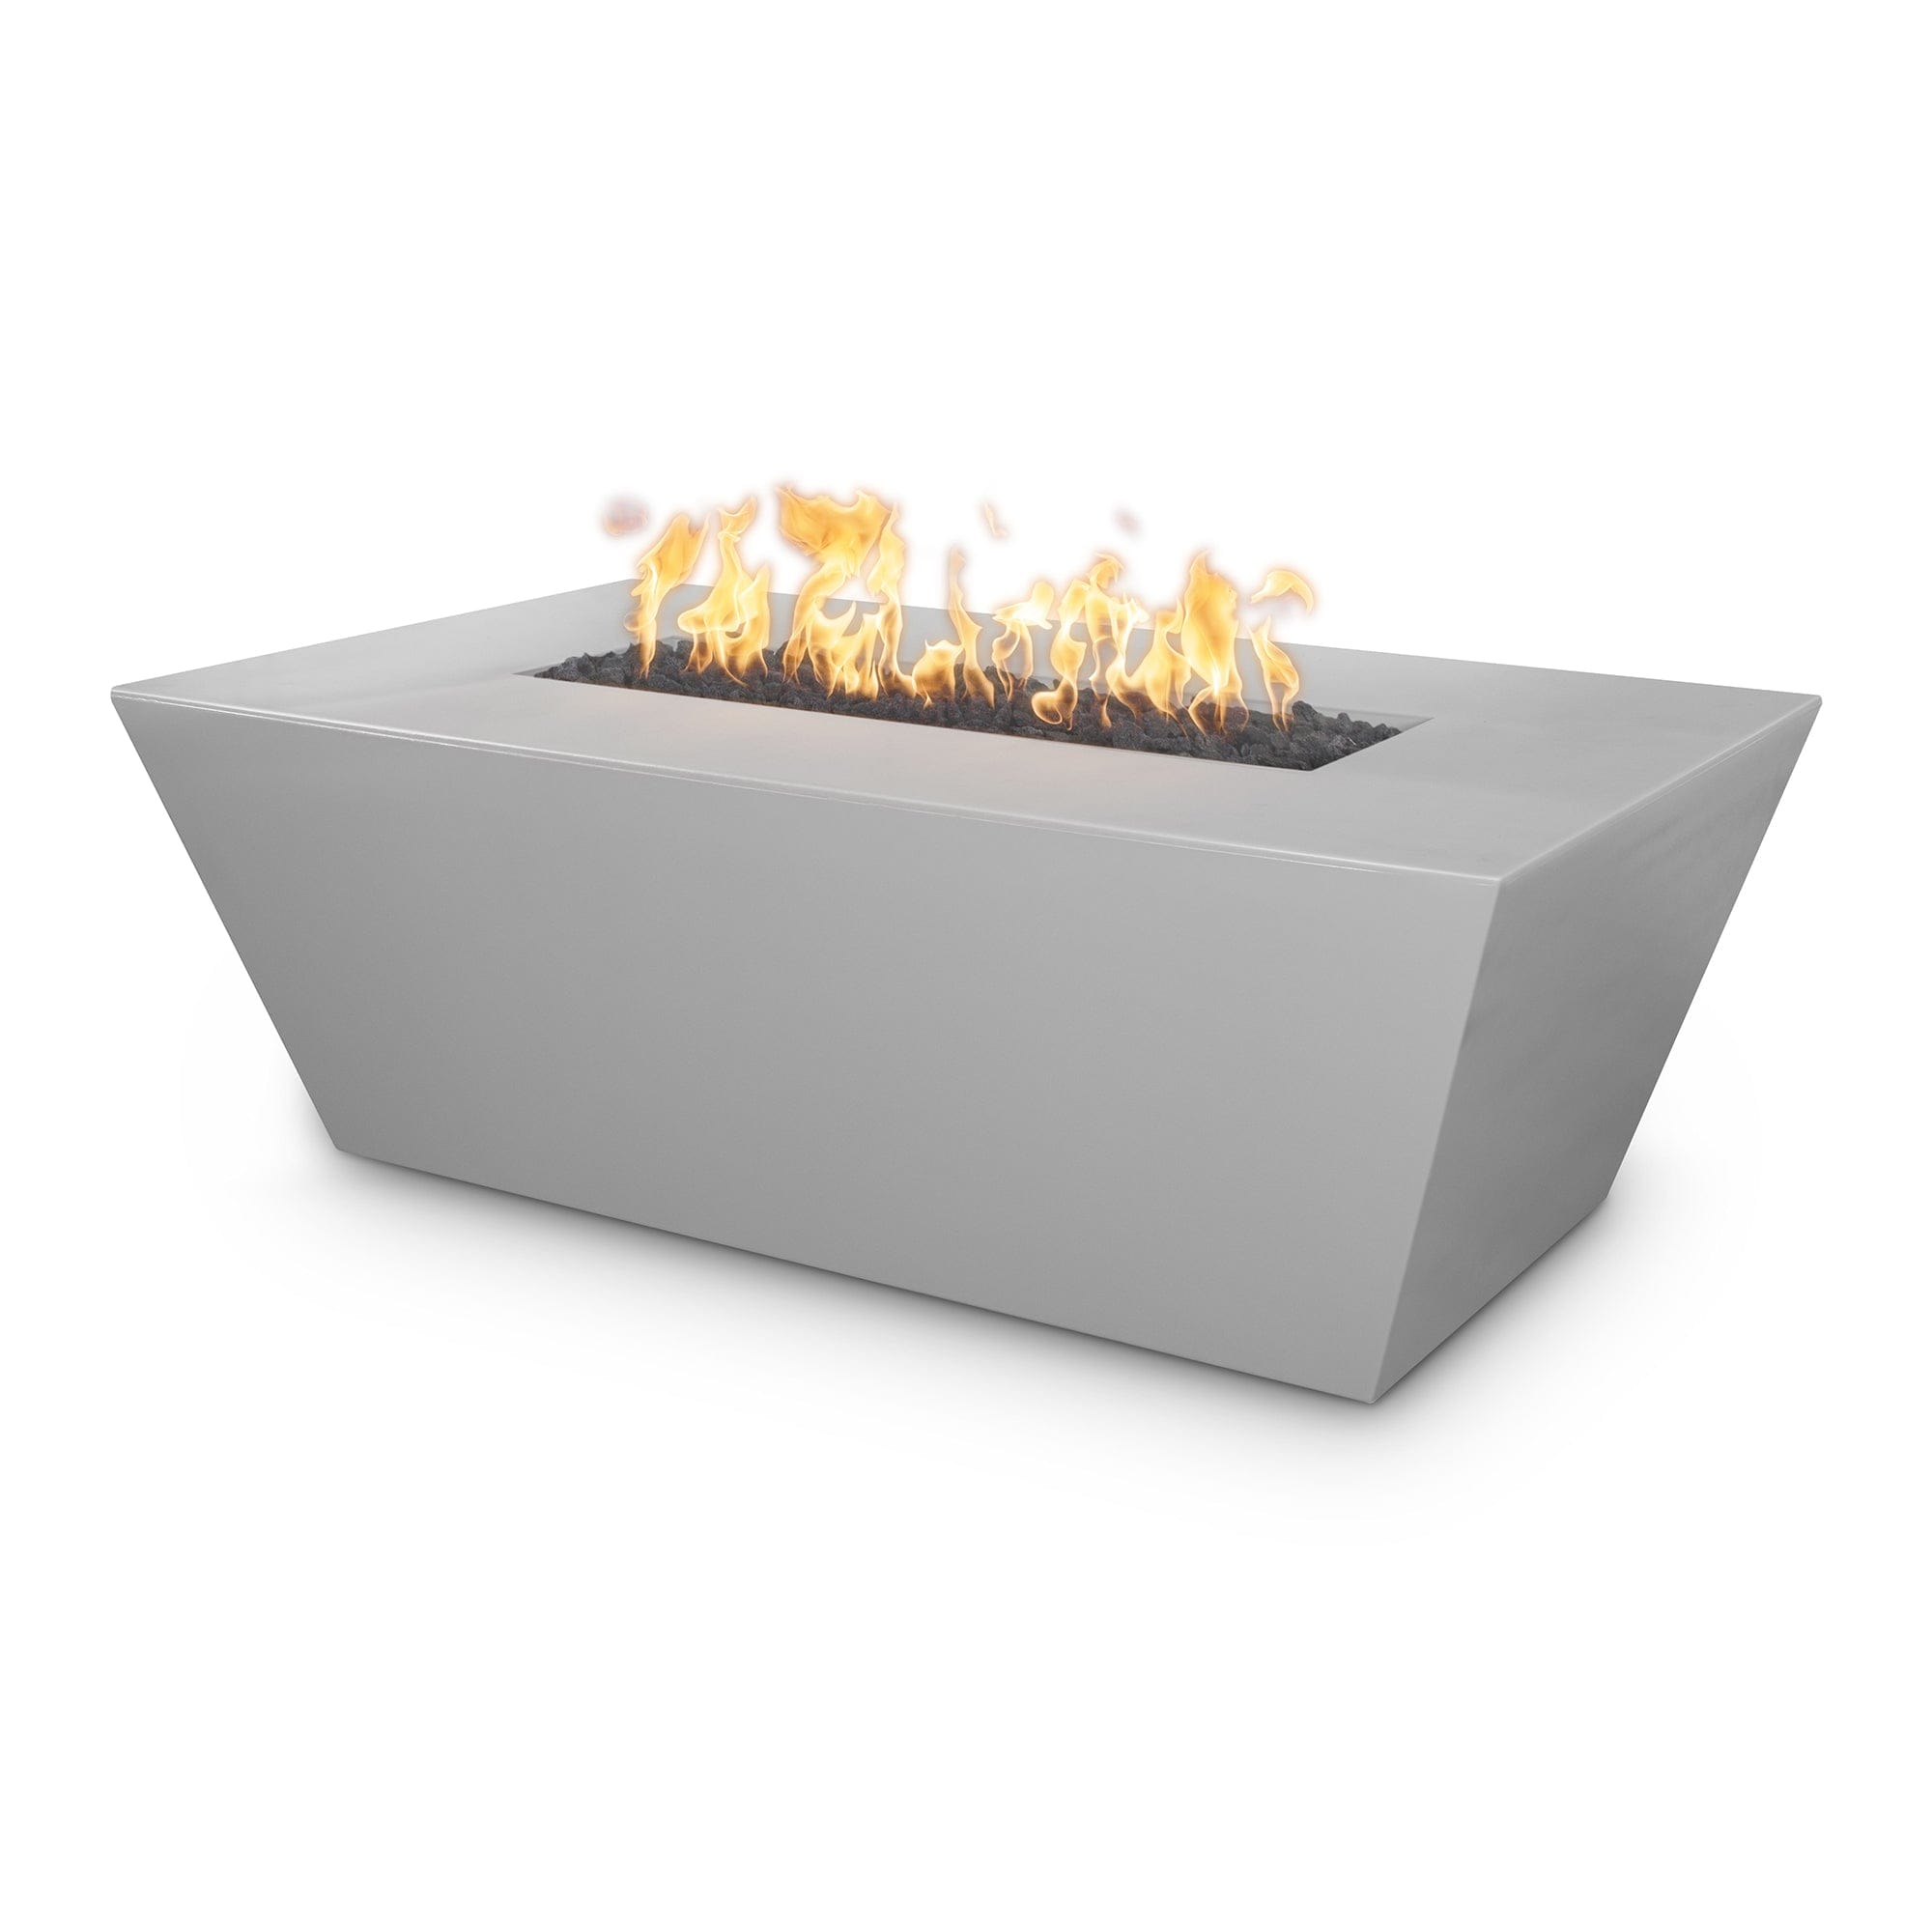 The Outdoor Plus Fire Pit 60" x 36" / Match Lit with Flame Sense System The Outdoor Plus Angelus Fire Pit | Concrete OPT-AGLGF60FSML